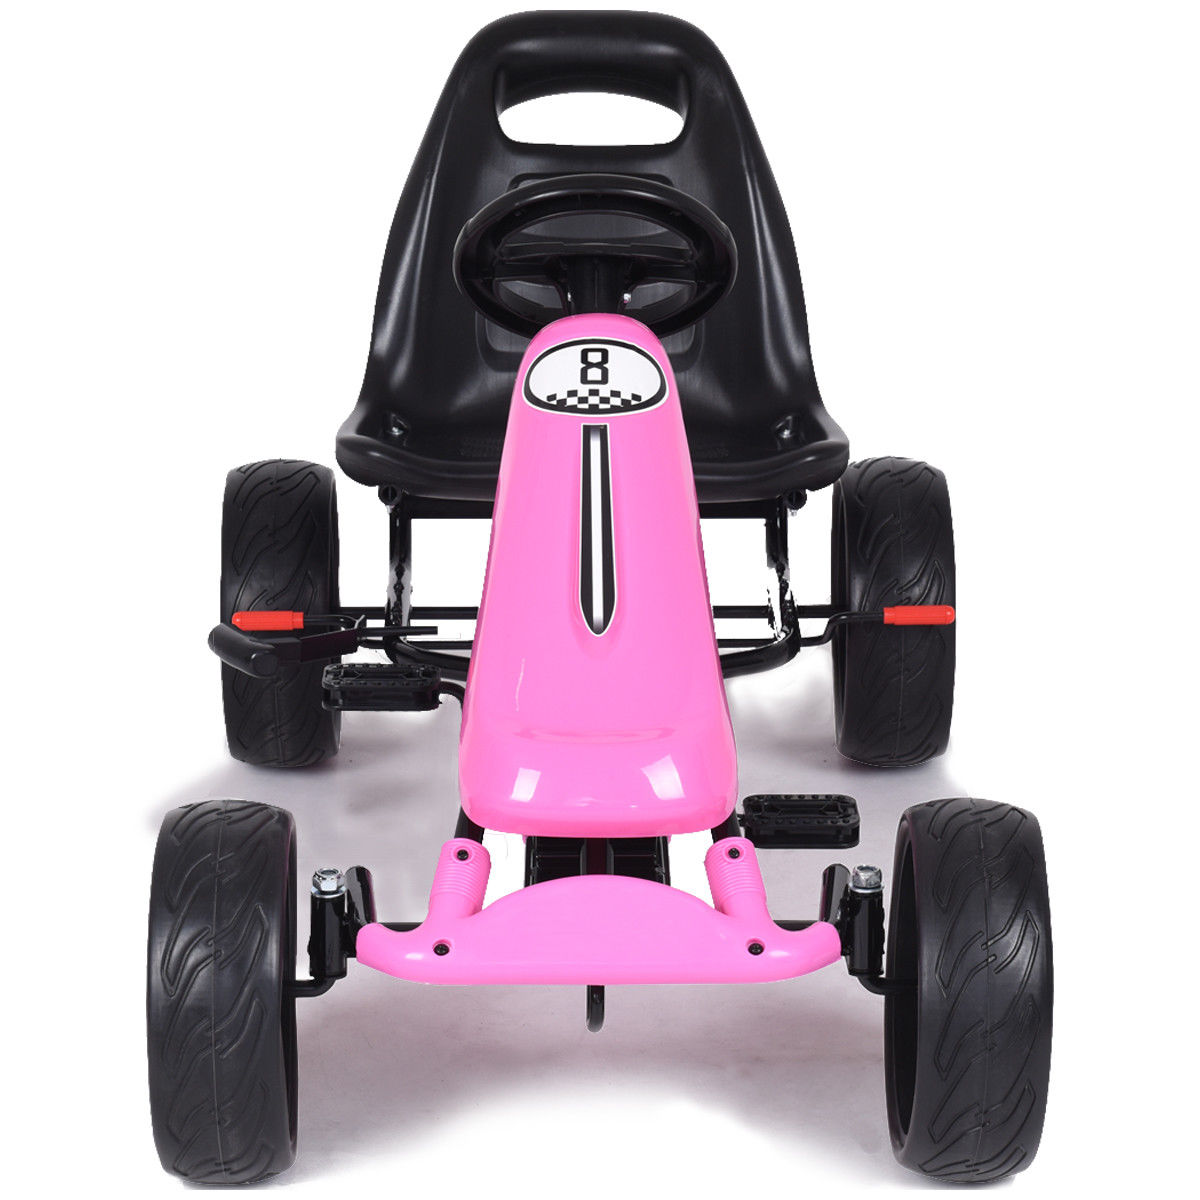 Go Kart Kids Ride On Car Pedal Powered 4 Wheel Racer Stealth Outdoor Toy Pink - image 2 of 10